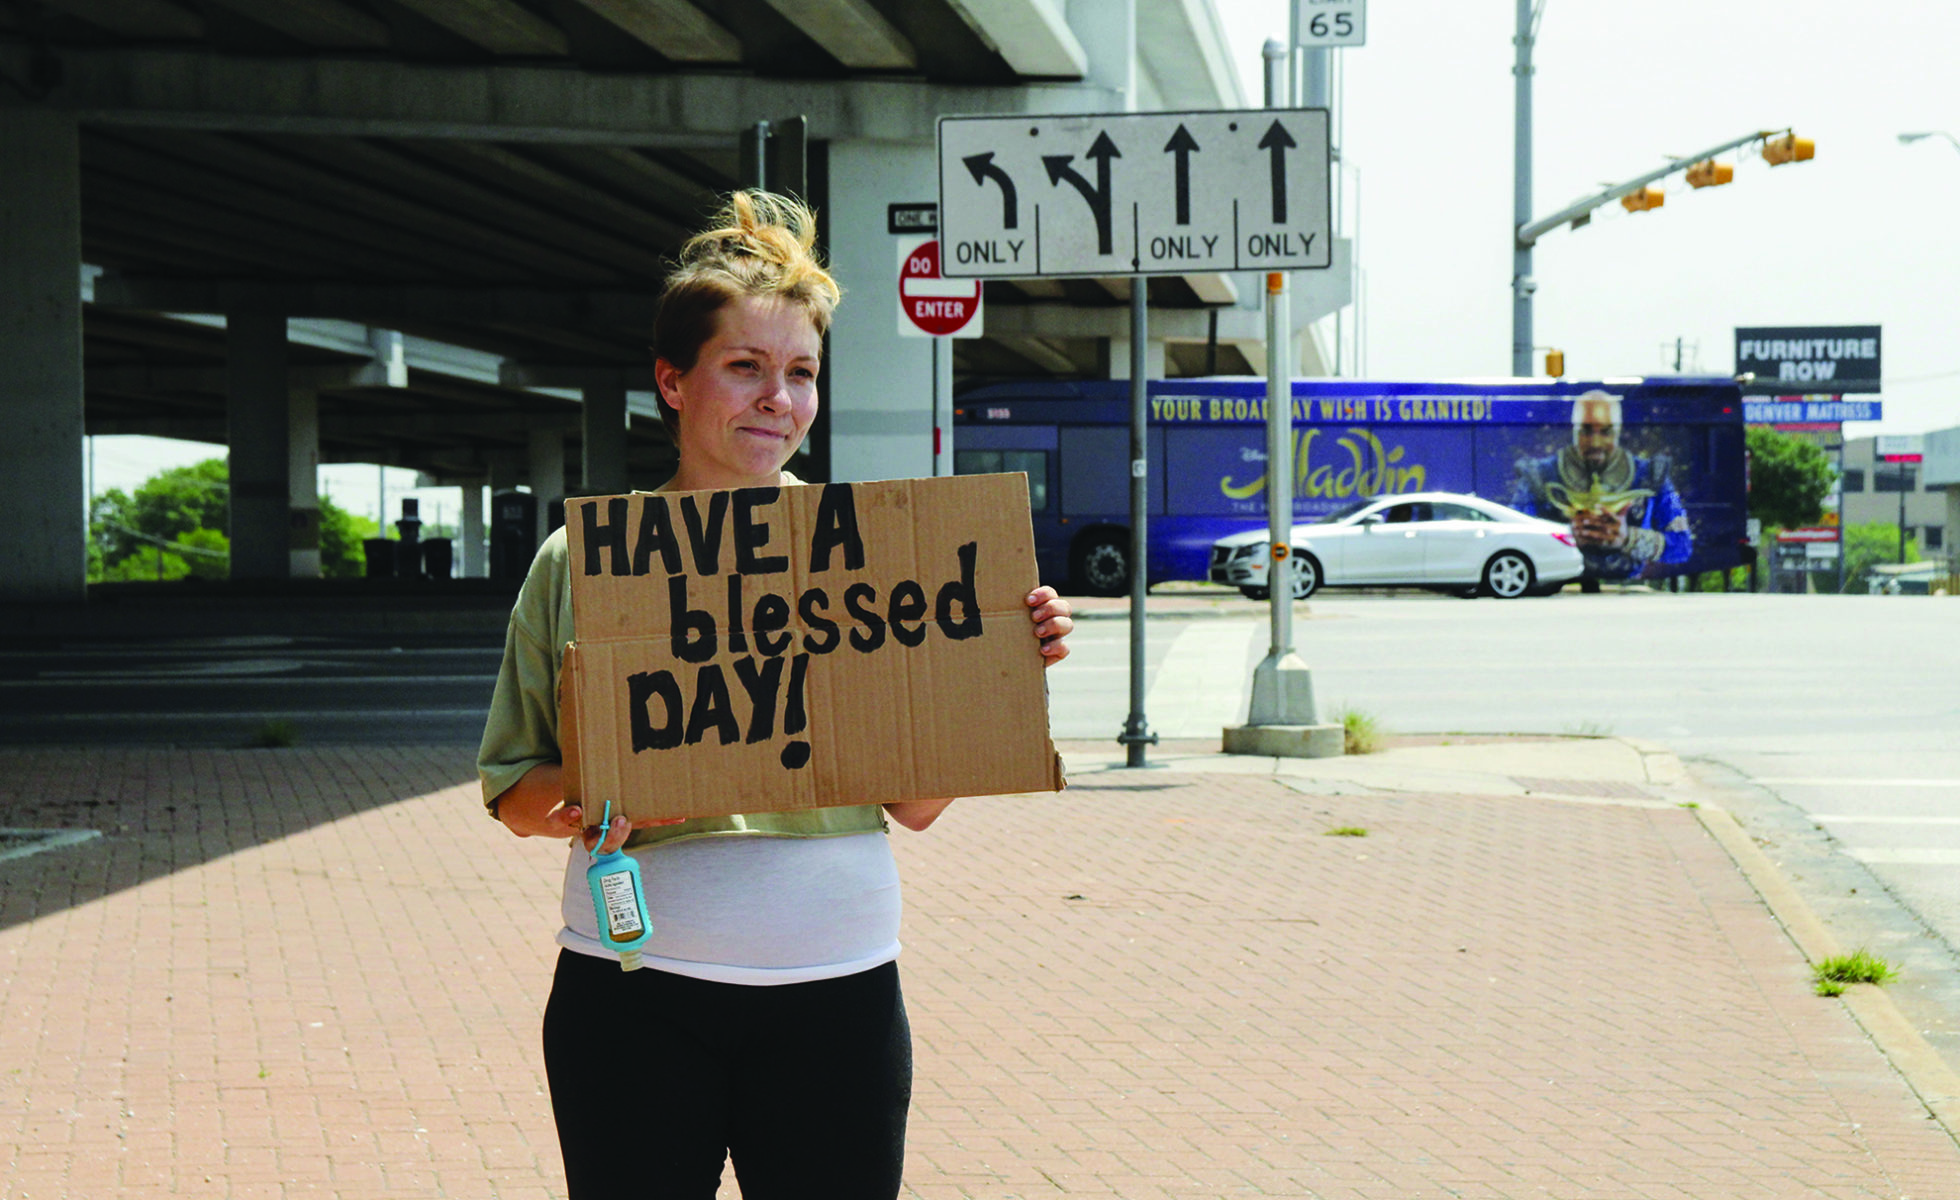 Rachel Schuyler lives under a bridge in North Austin. She started a group called Hobos with God to help her fellow unhoused.